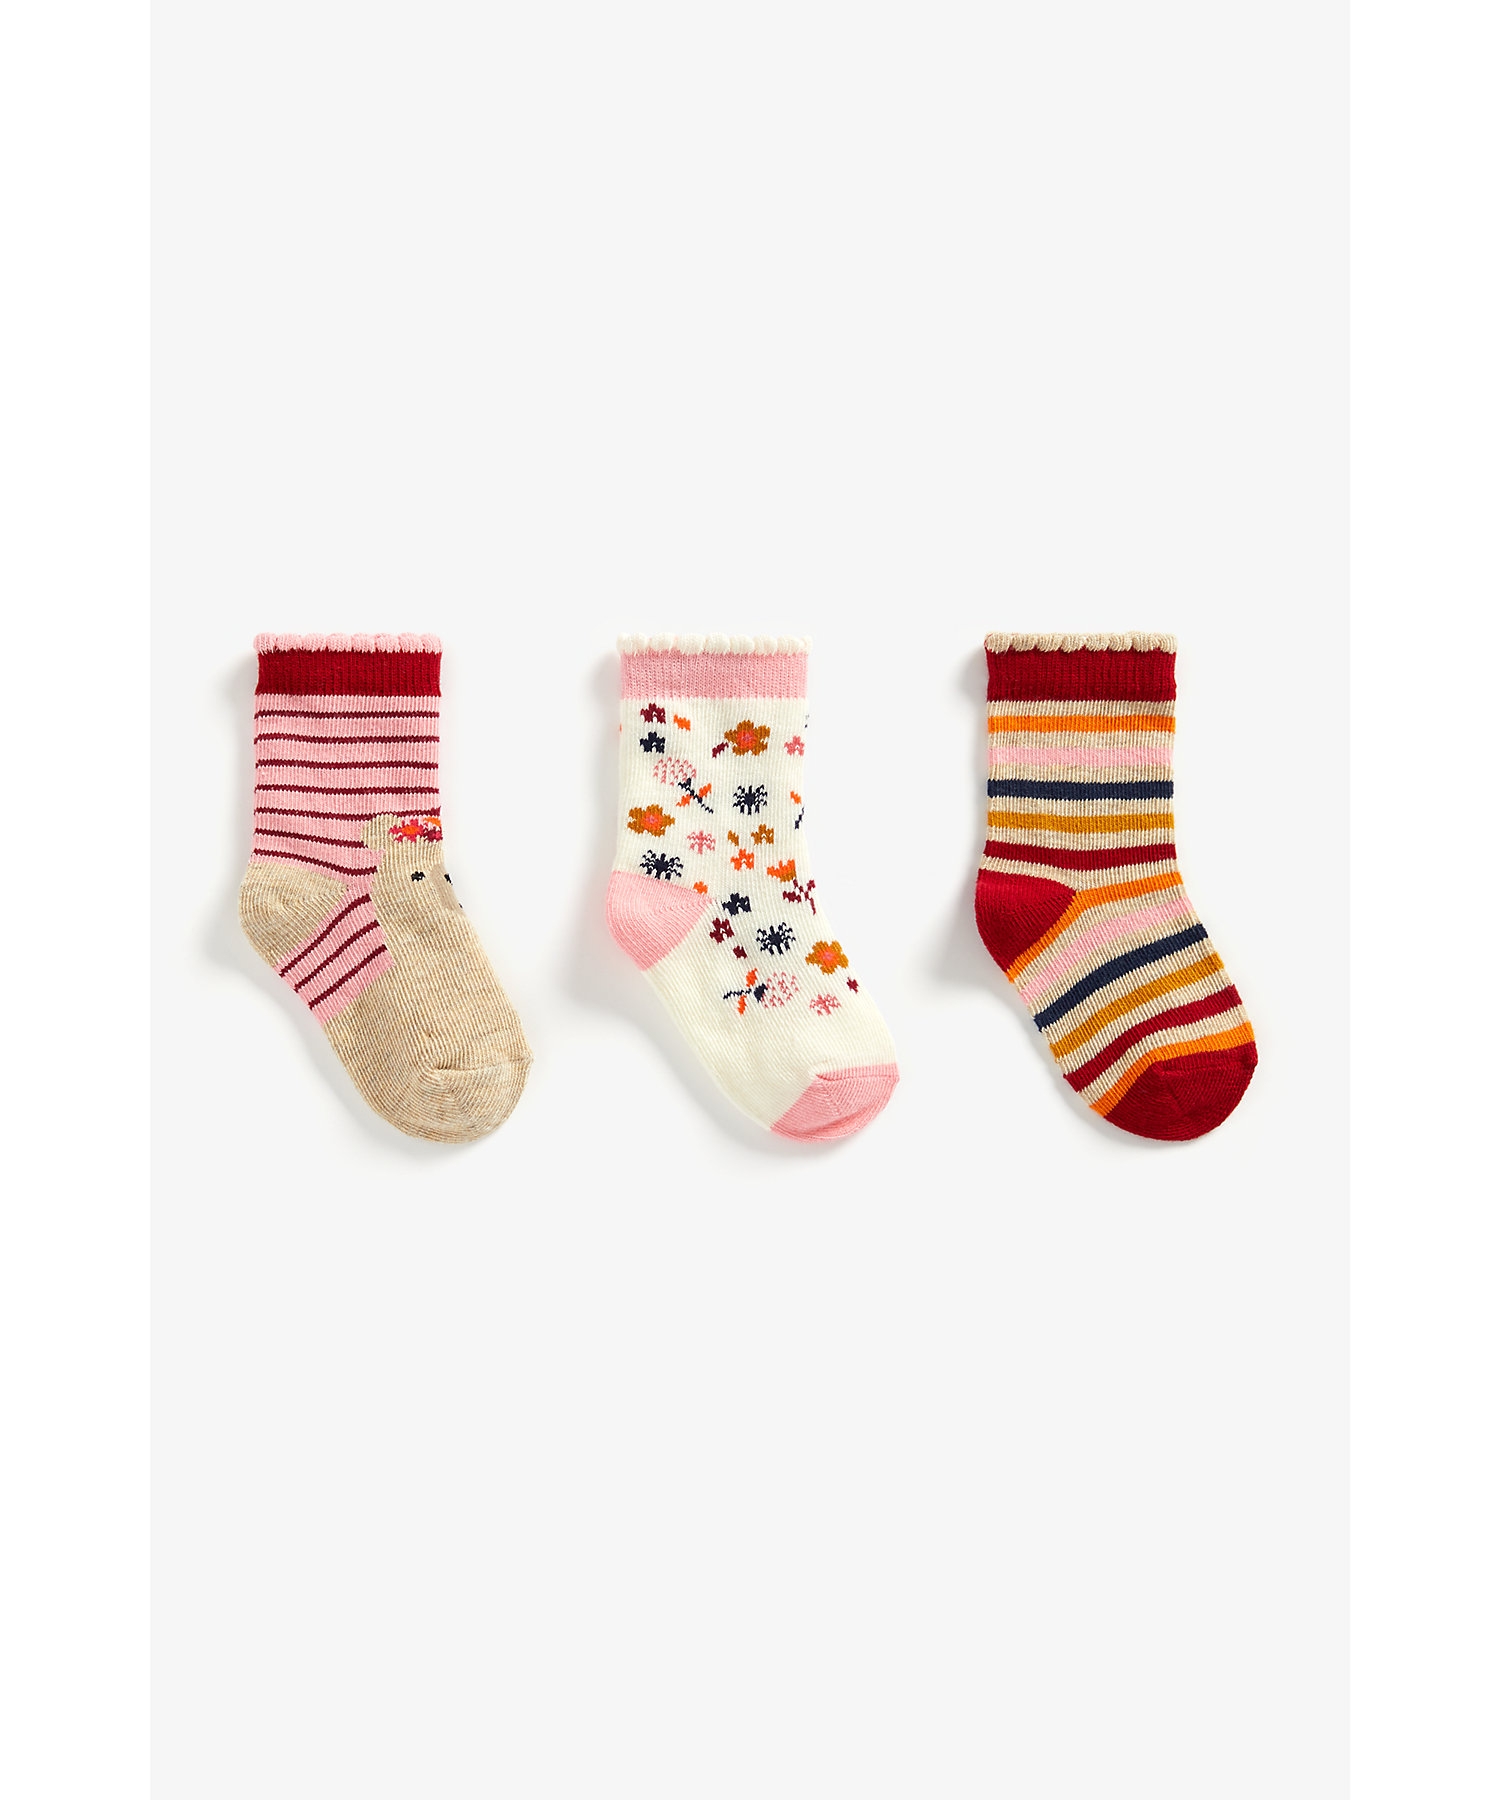 Mothercare | Girls Socks Striped And Floral Design - Pack Of 3 - Multicolor